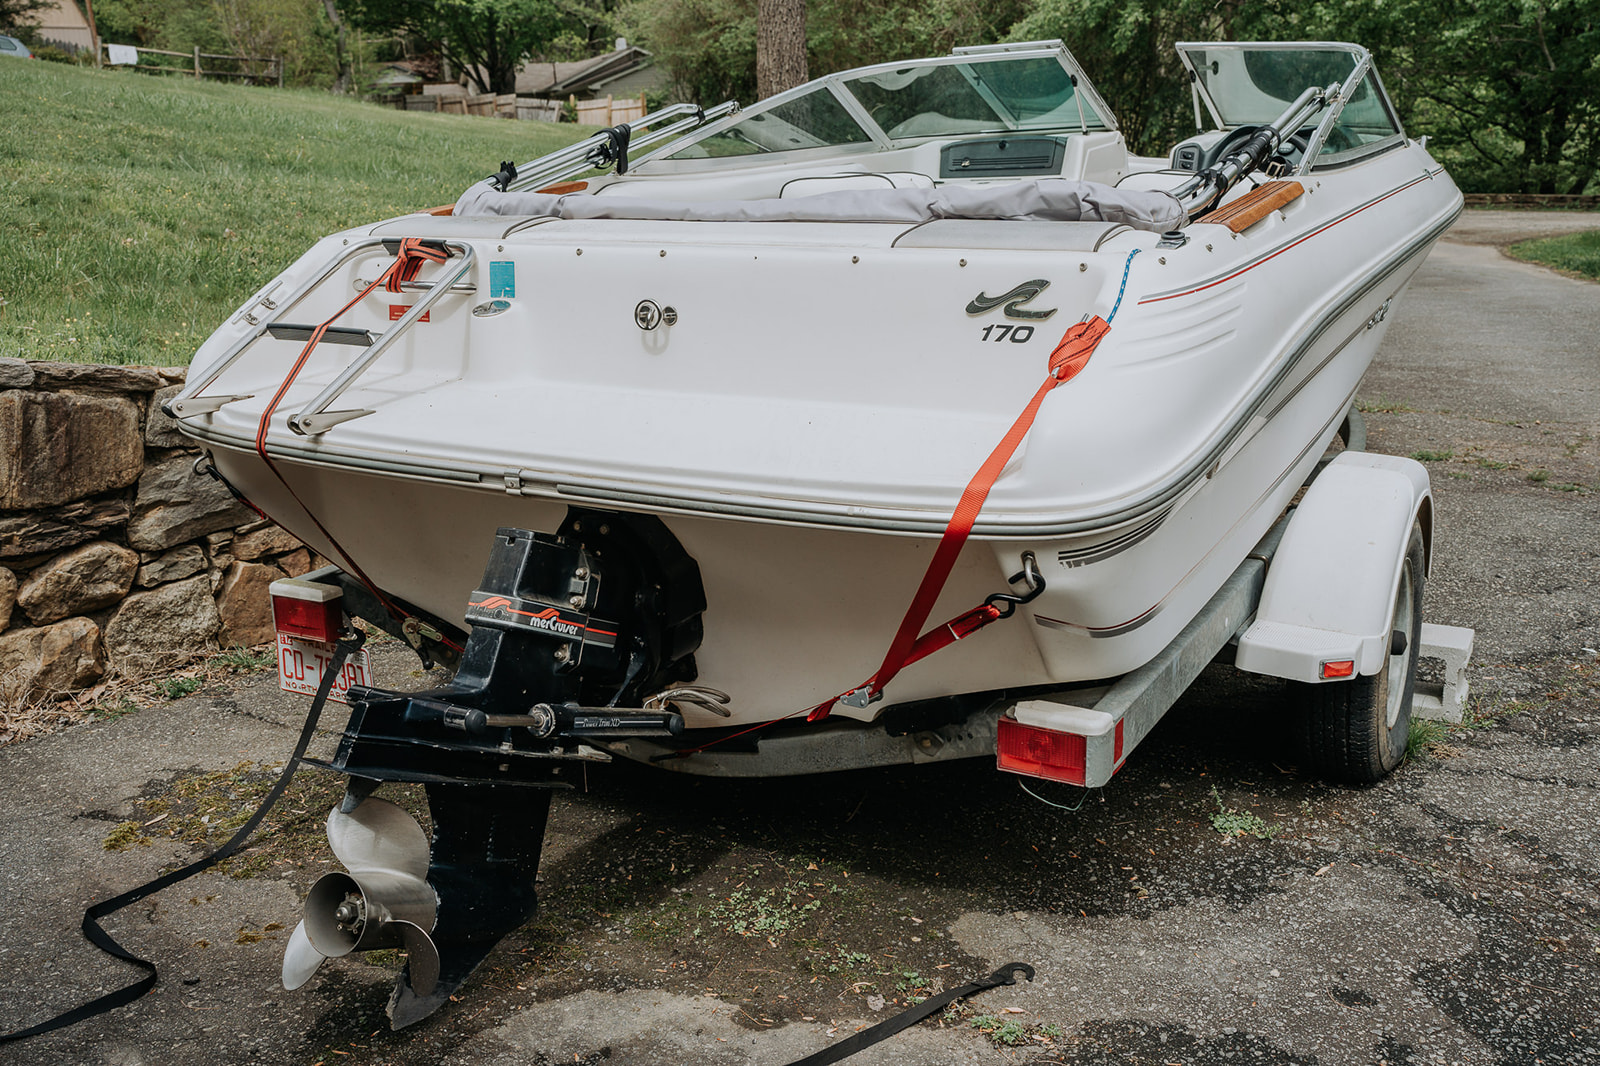 1991 Sea Ray 170 Bowrider Power boat for sale in Asheville, NC - image 14 